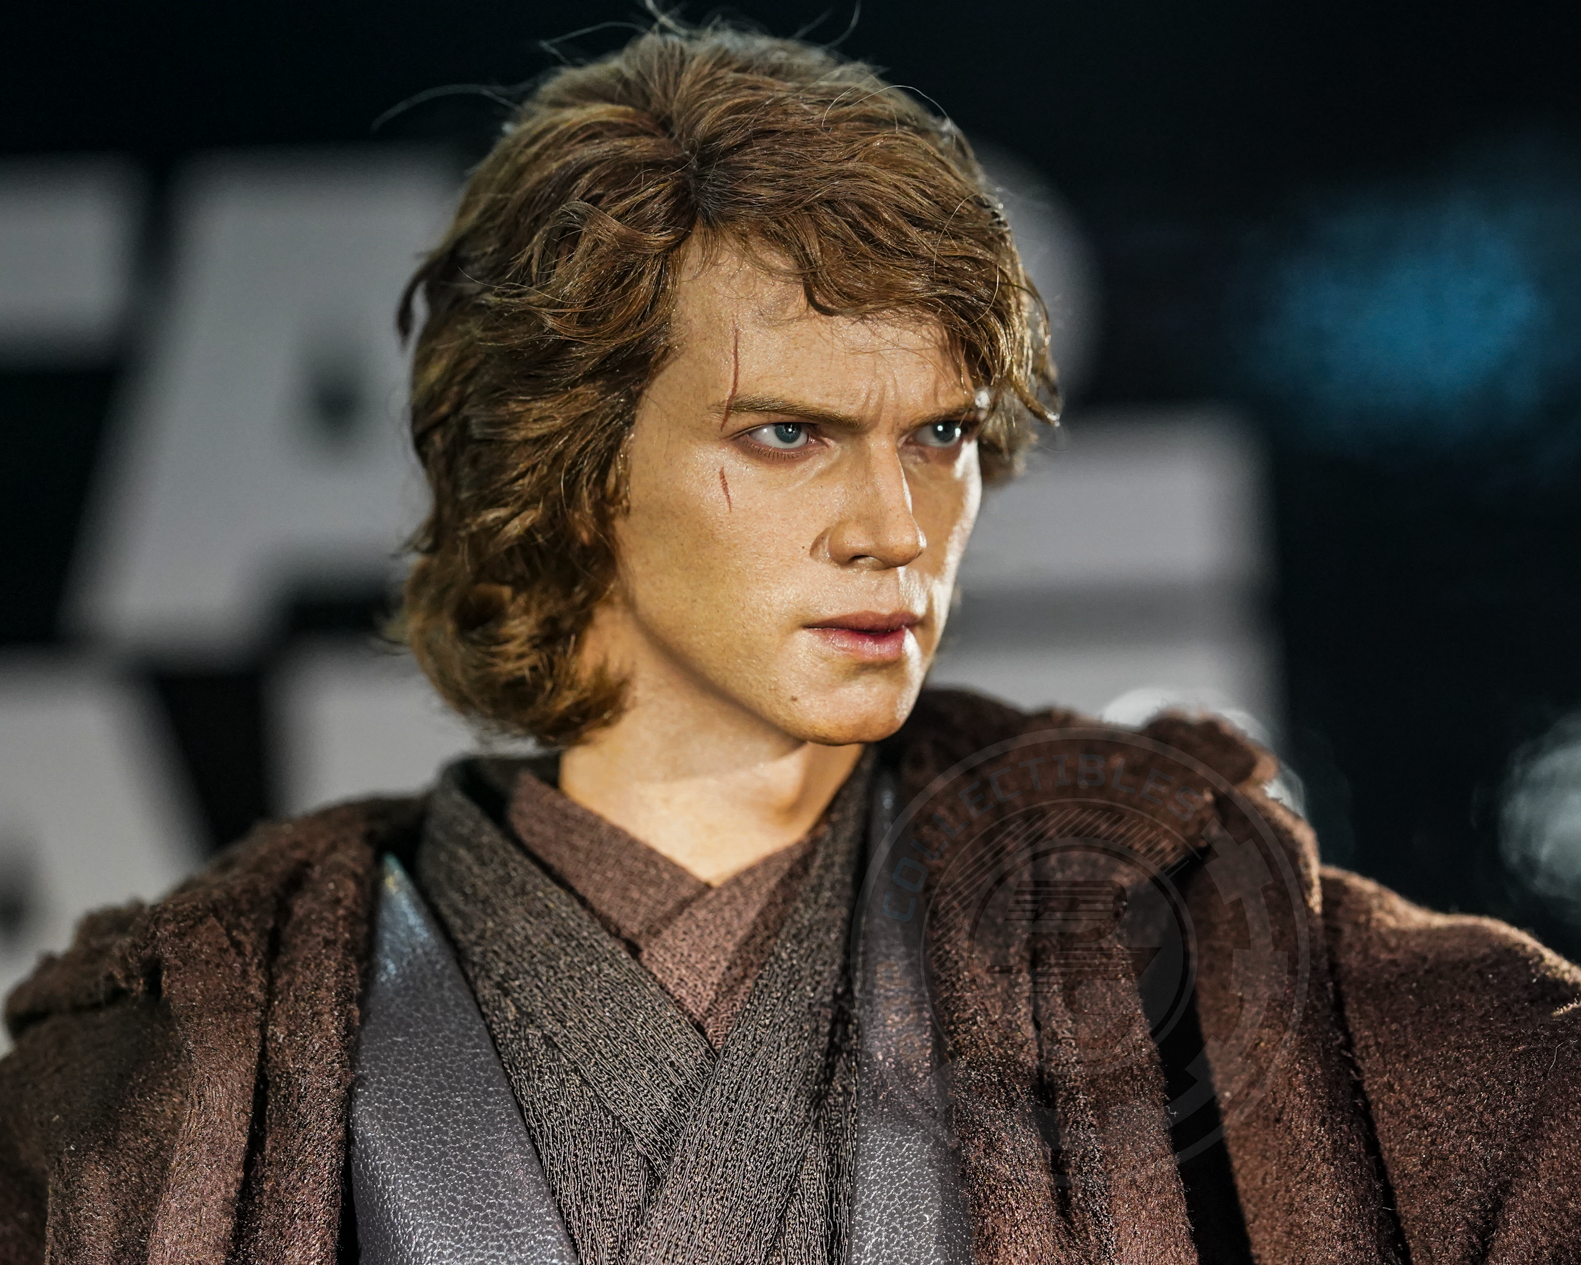 NEW PRODUCT: HOT TOYS: STAR WARS EPISODE III: REVENGE OF THE SITH™ ANAKIN SKYWALKER™ 1/6TH SCALE COLLECTIBLE FIGURE - Page 7 DSC03930-2_1024x1024@2x